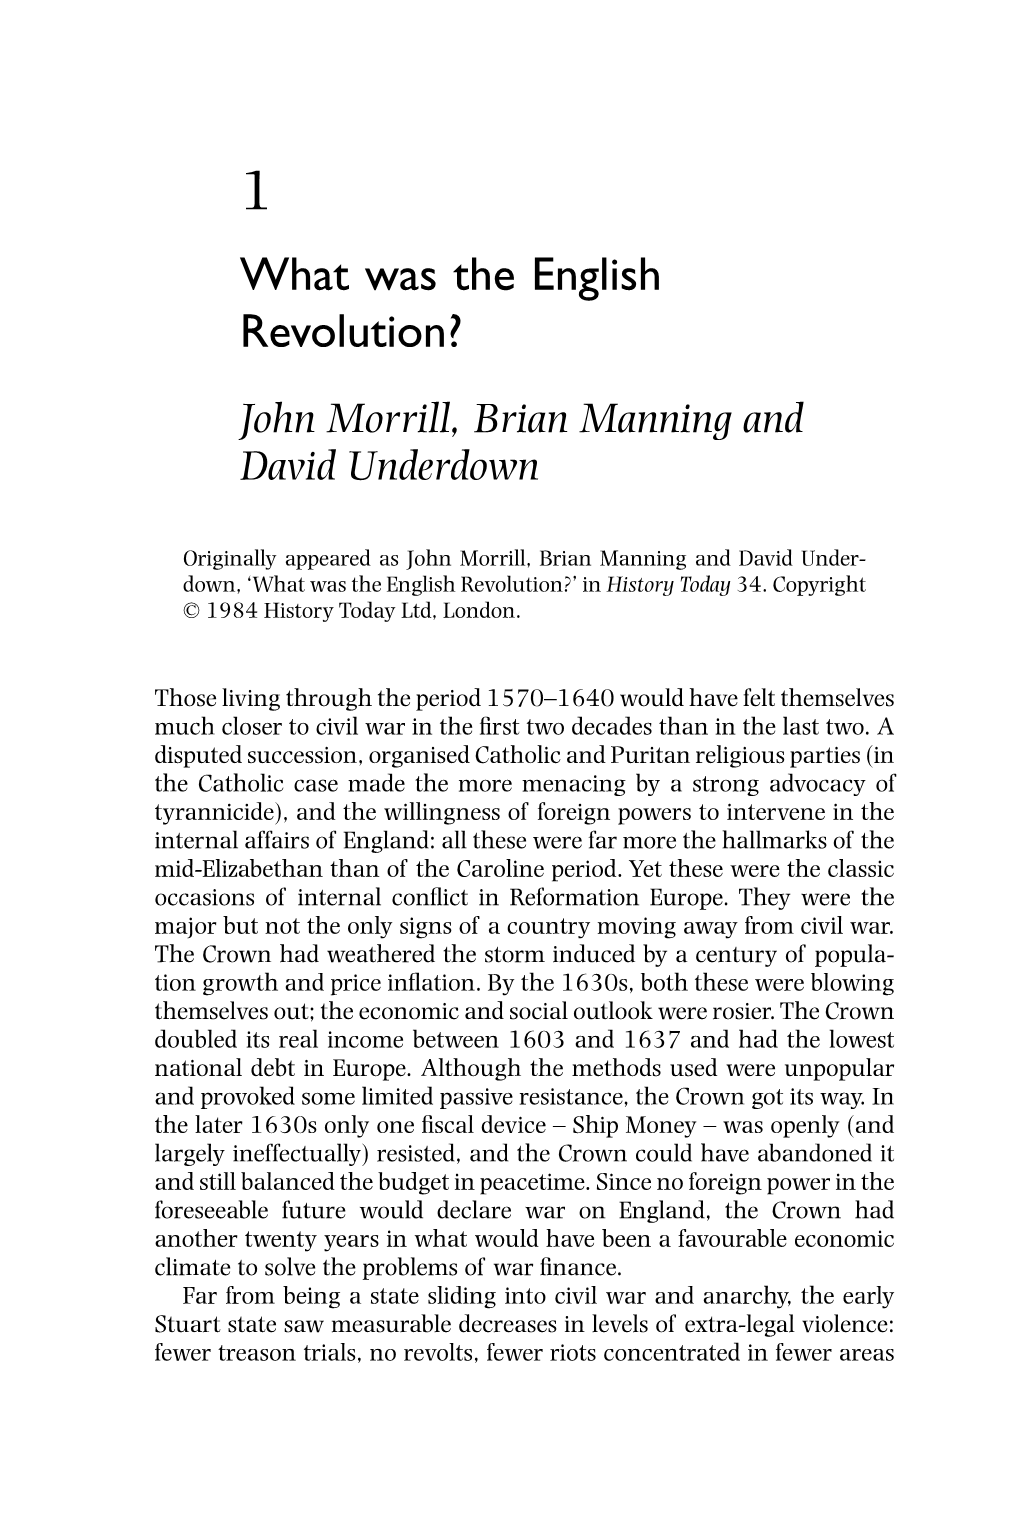 What Was the English Revolution? John Morrill, Brian Manning and David Underdown